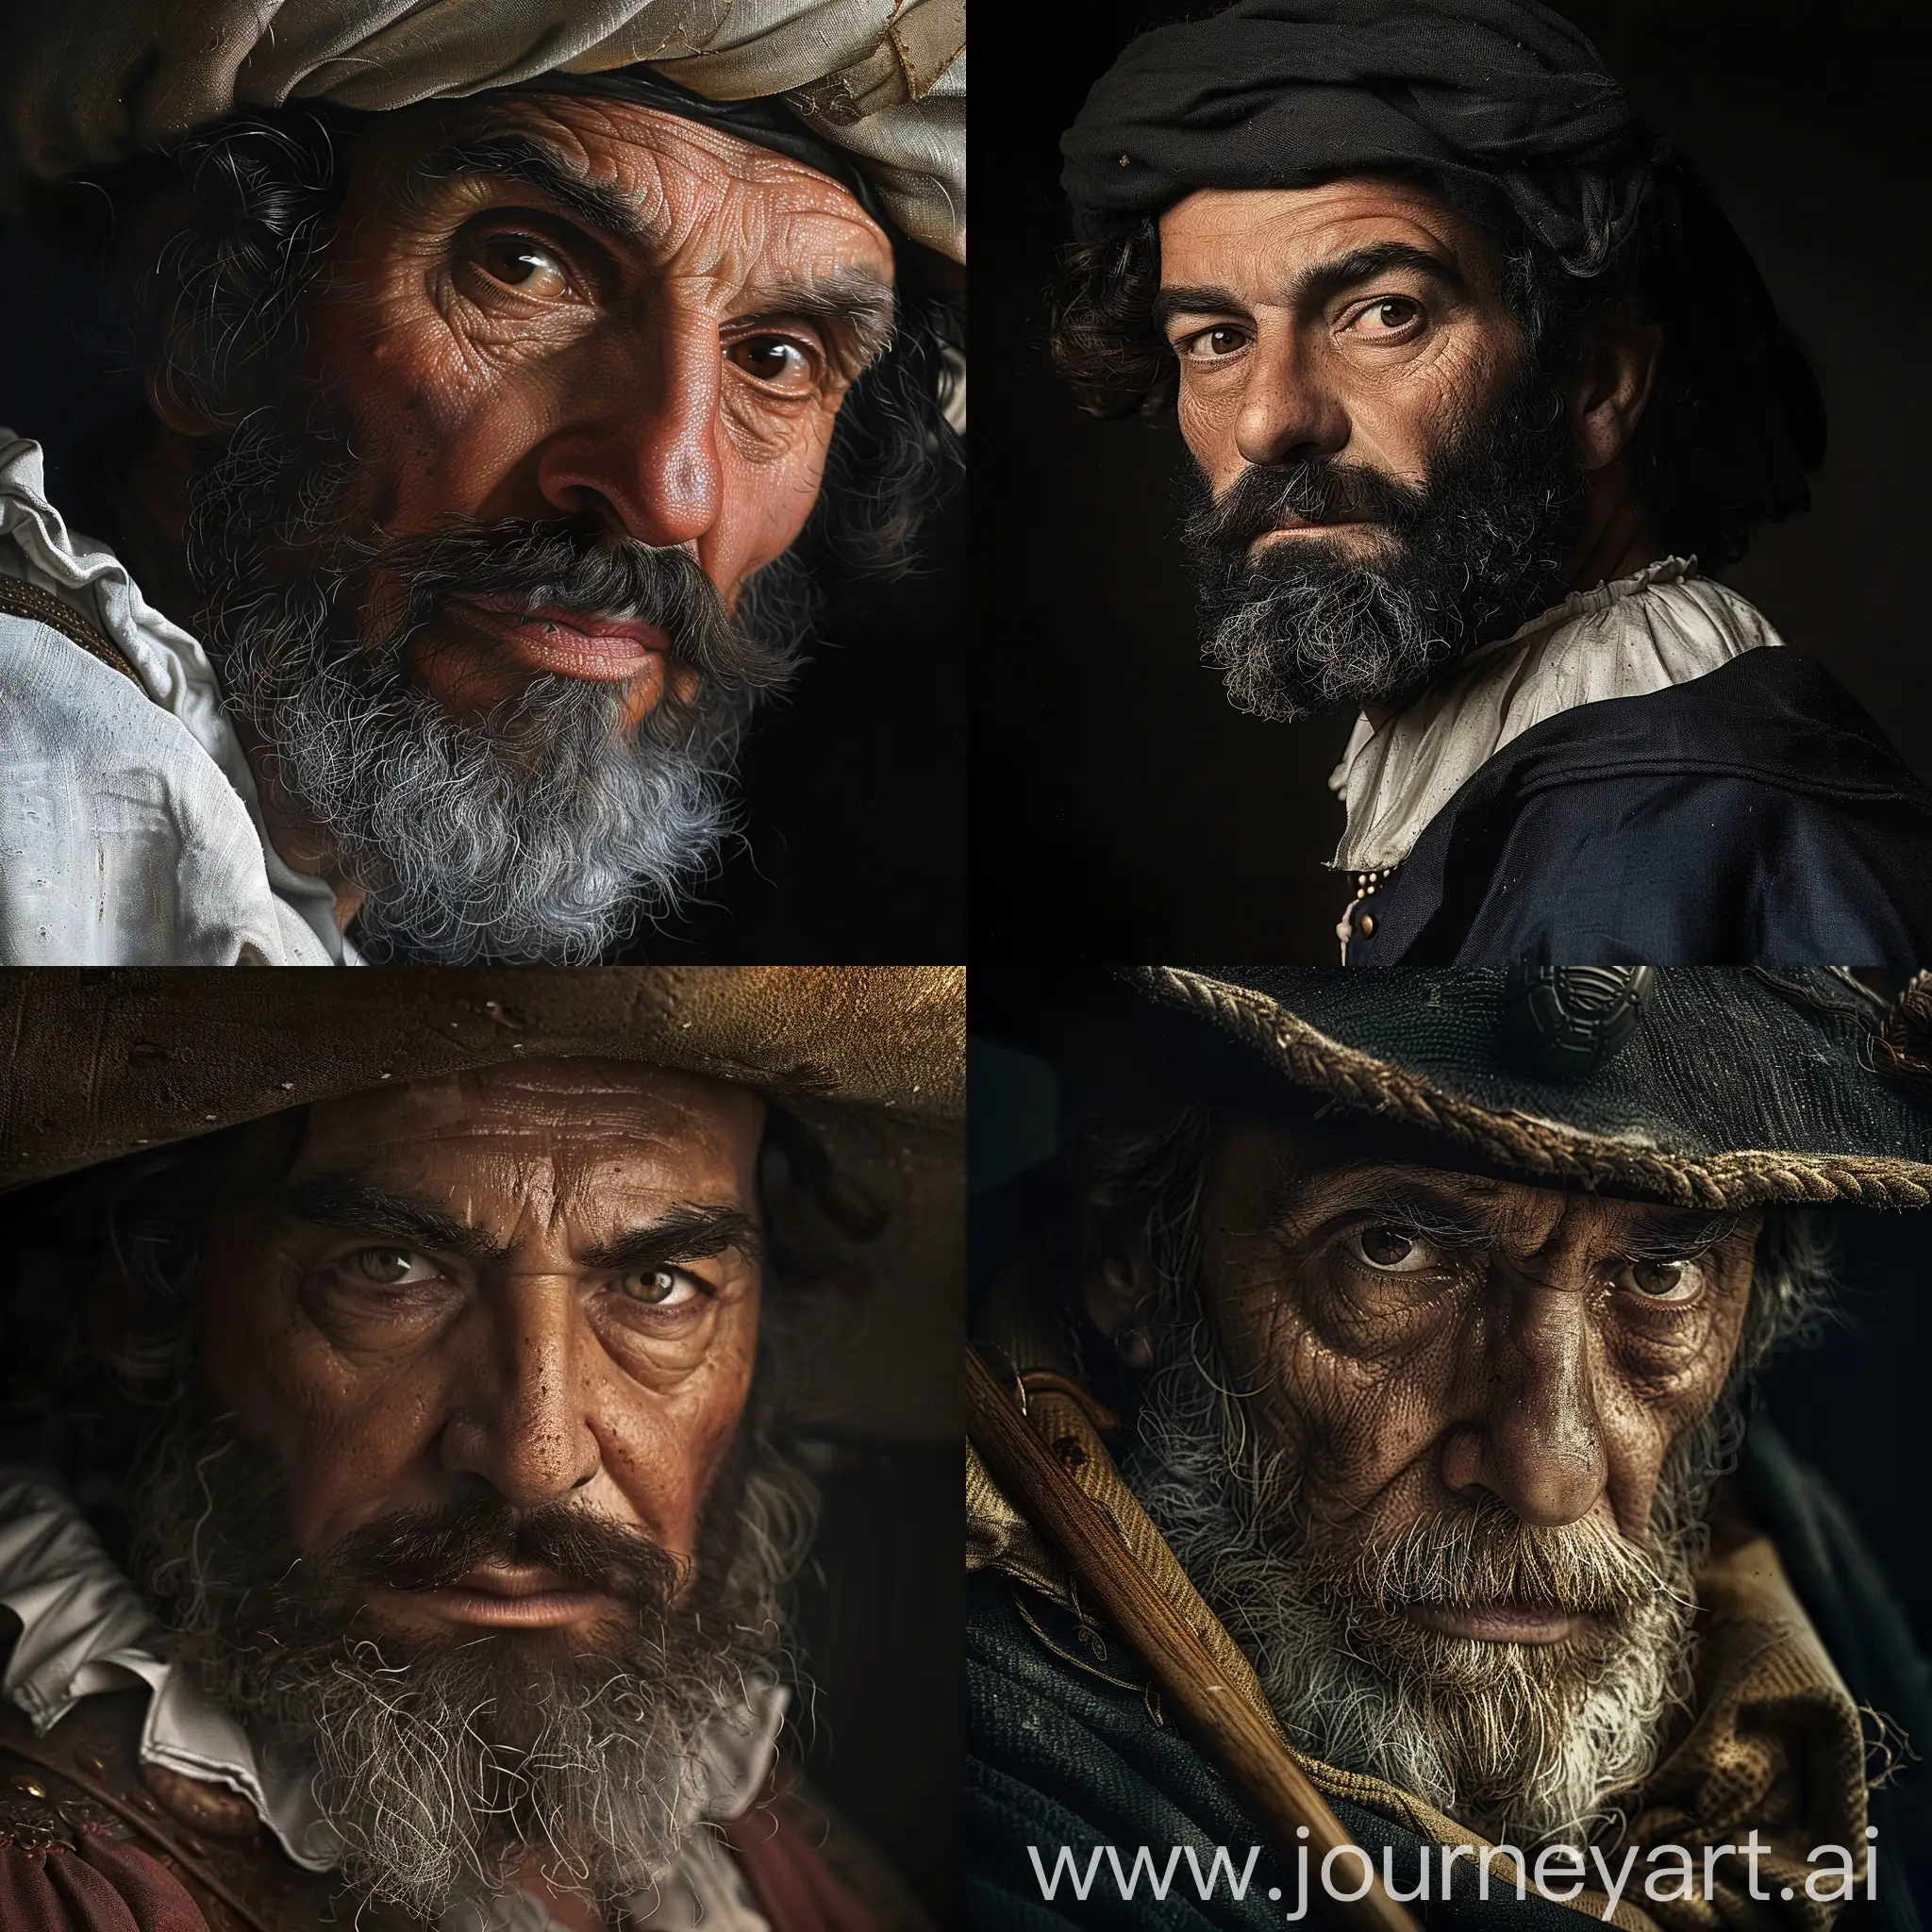 Portuguese sailor from the 16th century xvi fighting Adamastor very realistic photo, photorealism, a kind and serene face of the writer, wide angle 